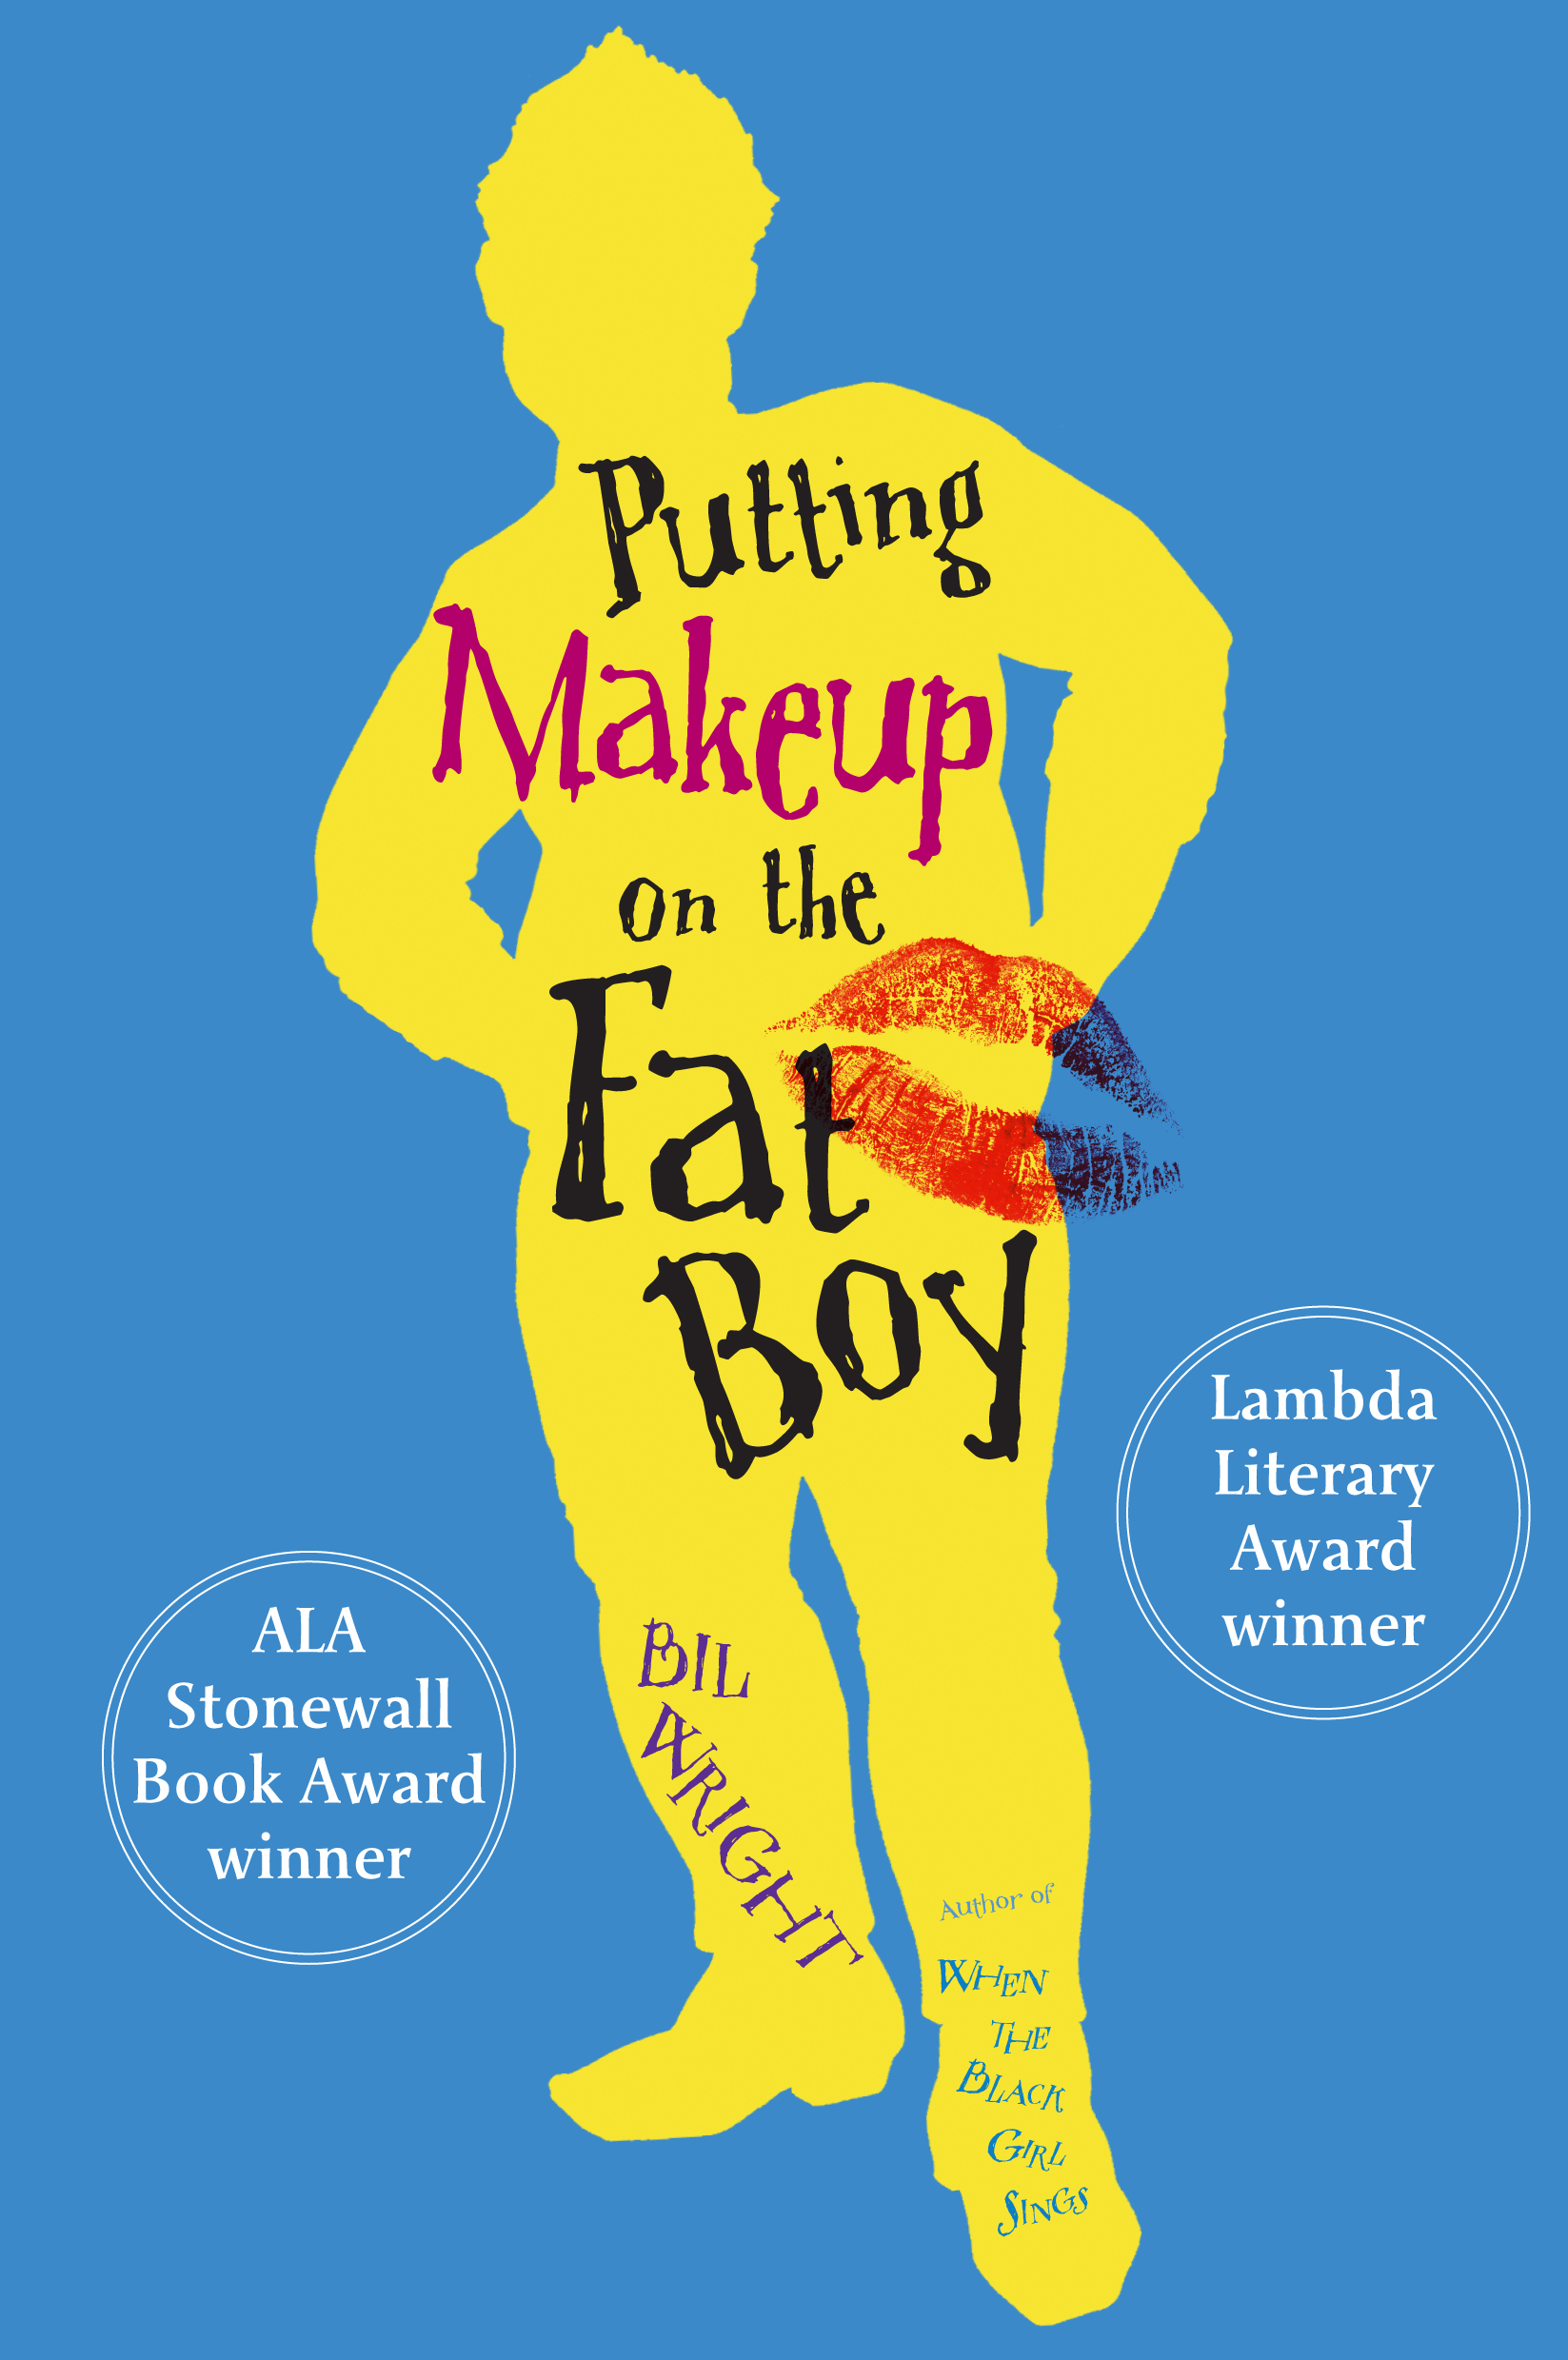 banned books: putting makeup on the fat boy by Bil Wright